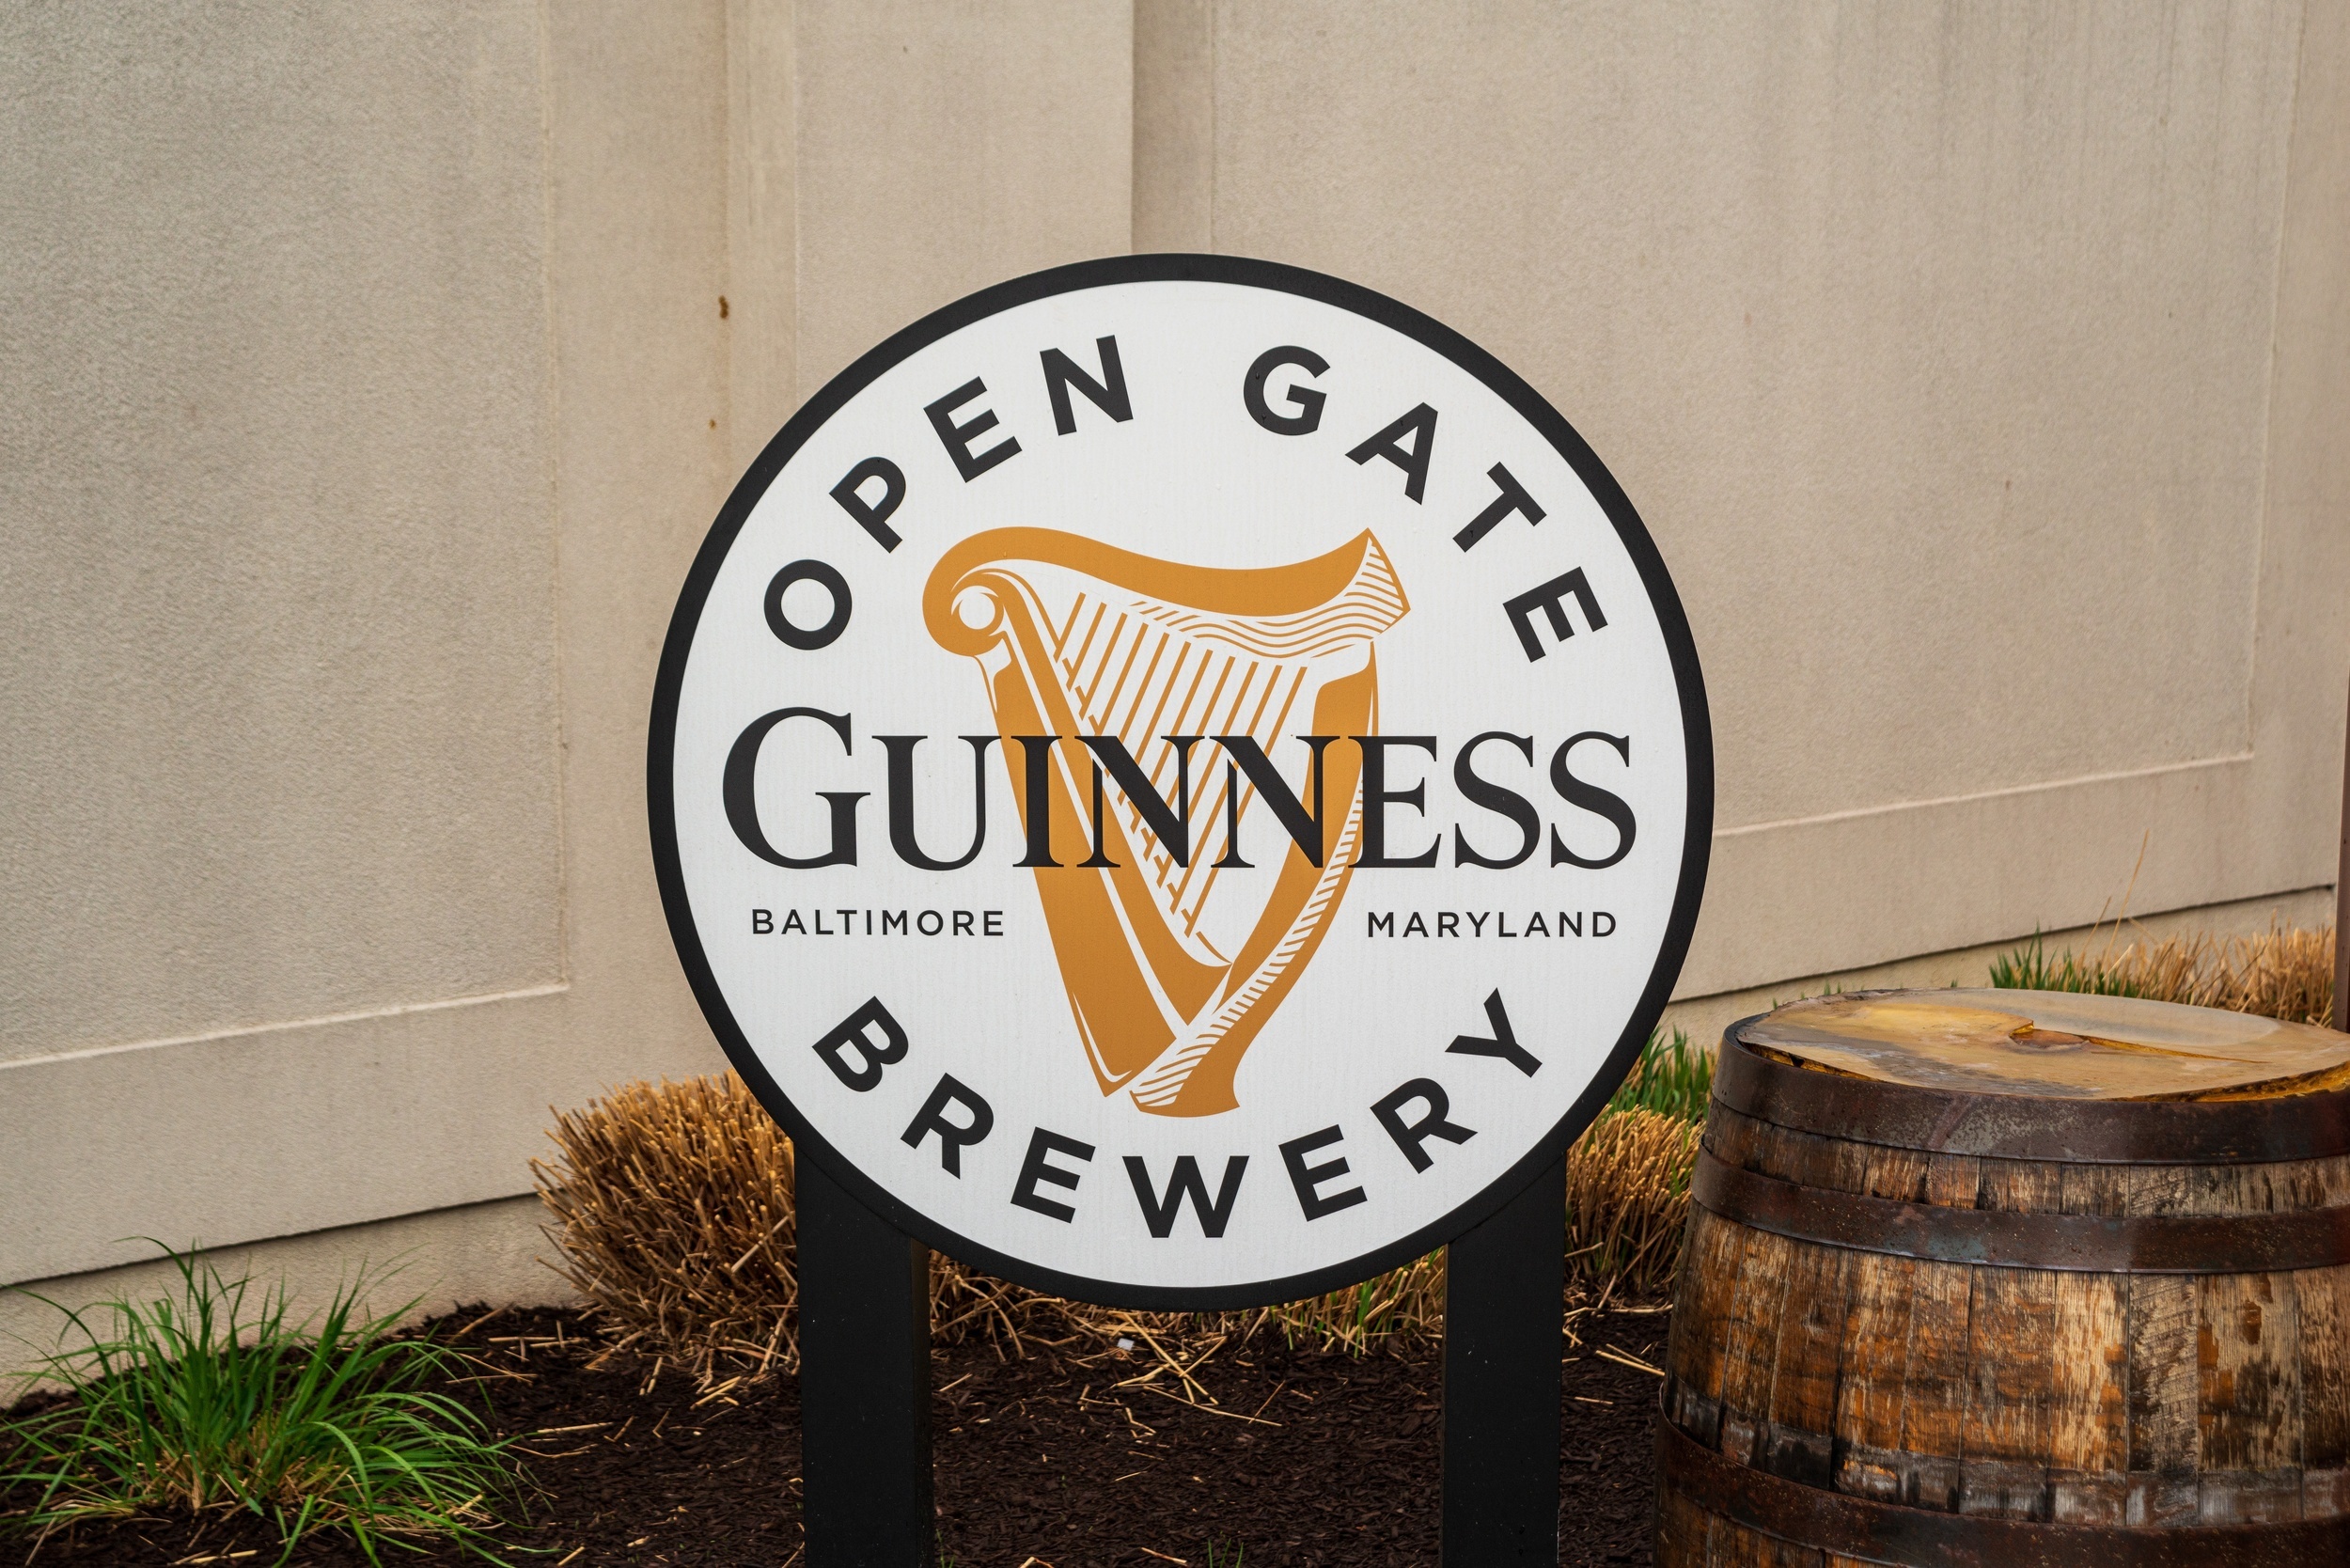 <p>If you're wondering why this Ireland-based brewery is on the list, here's why: they have a beautiful brewery located on the outskirts of Baltimore. Guinness opened its American location in 2015, incorporating its 260-plus-year history into a state-of-the-art sprawling campus. Their classic beer is, of course, the star here, but there's also a line of experimental beers only found there. When visiting here, try to stop in when the weather is nice, as their outside area is filled with greenery, games, seating, and TVs. </p><p><a href='https://www.msn.com/en-us/community/channel/vid-cj9pqbr0vn9in2b6ddcd8sfgpfq6x6utp44fssrv6mc2gtybw0us'>Follow us on MSN to see more of our exclusive lifestyle content.</a></p>